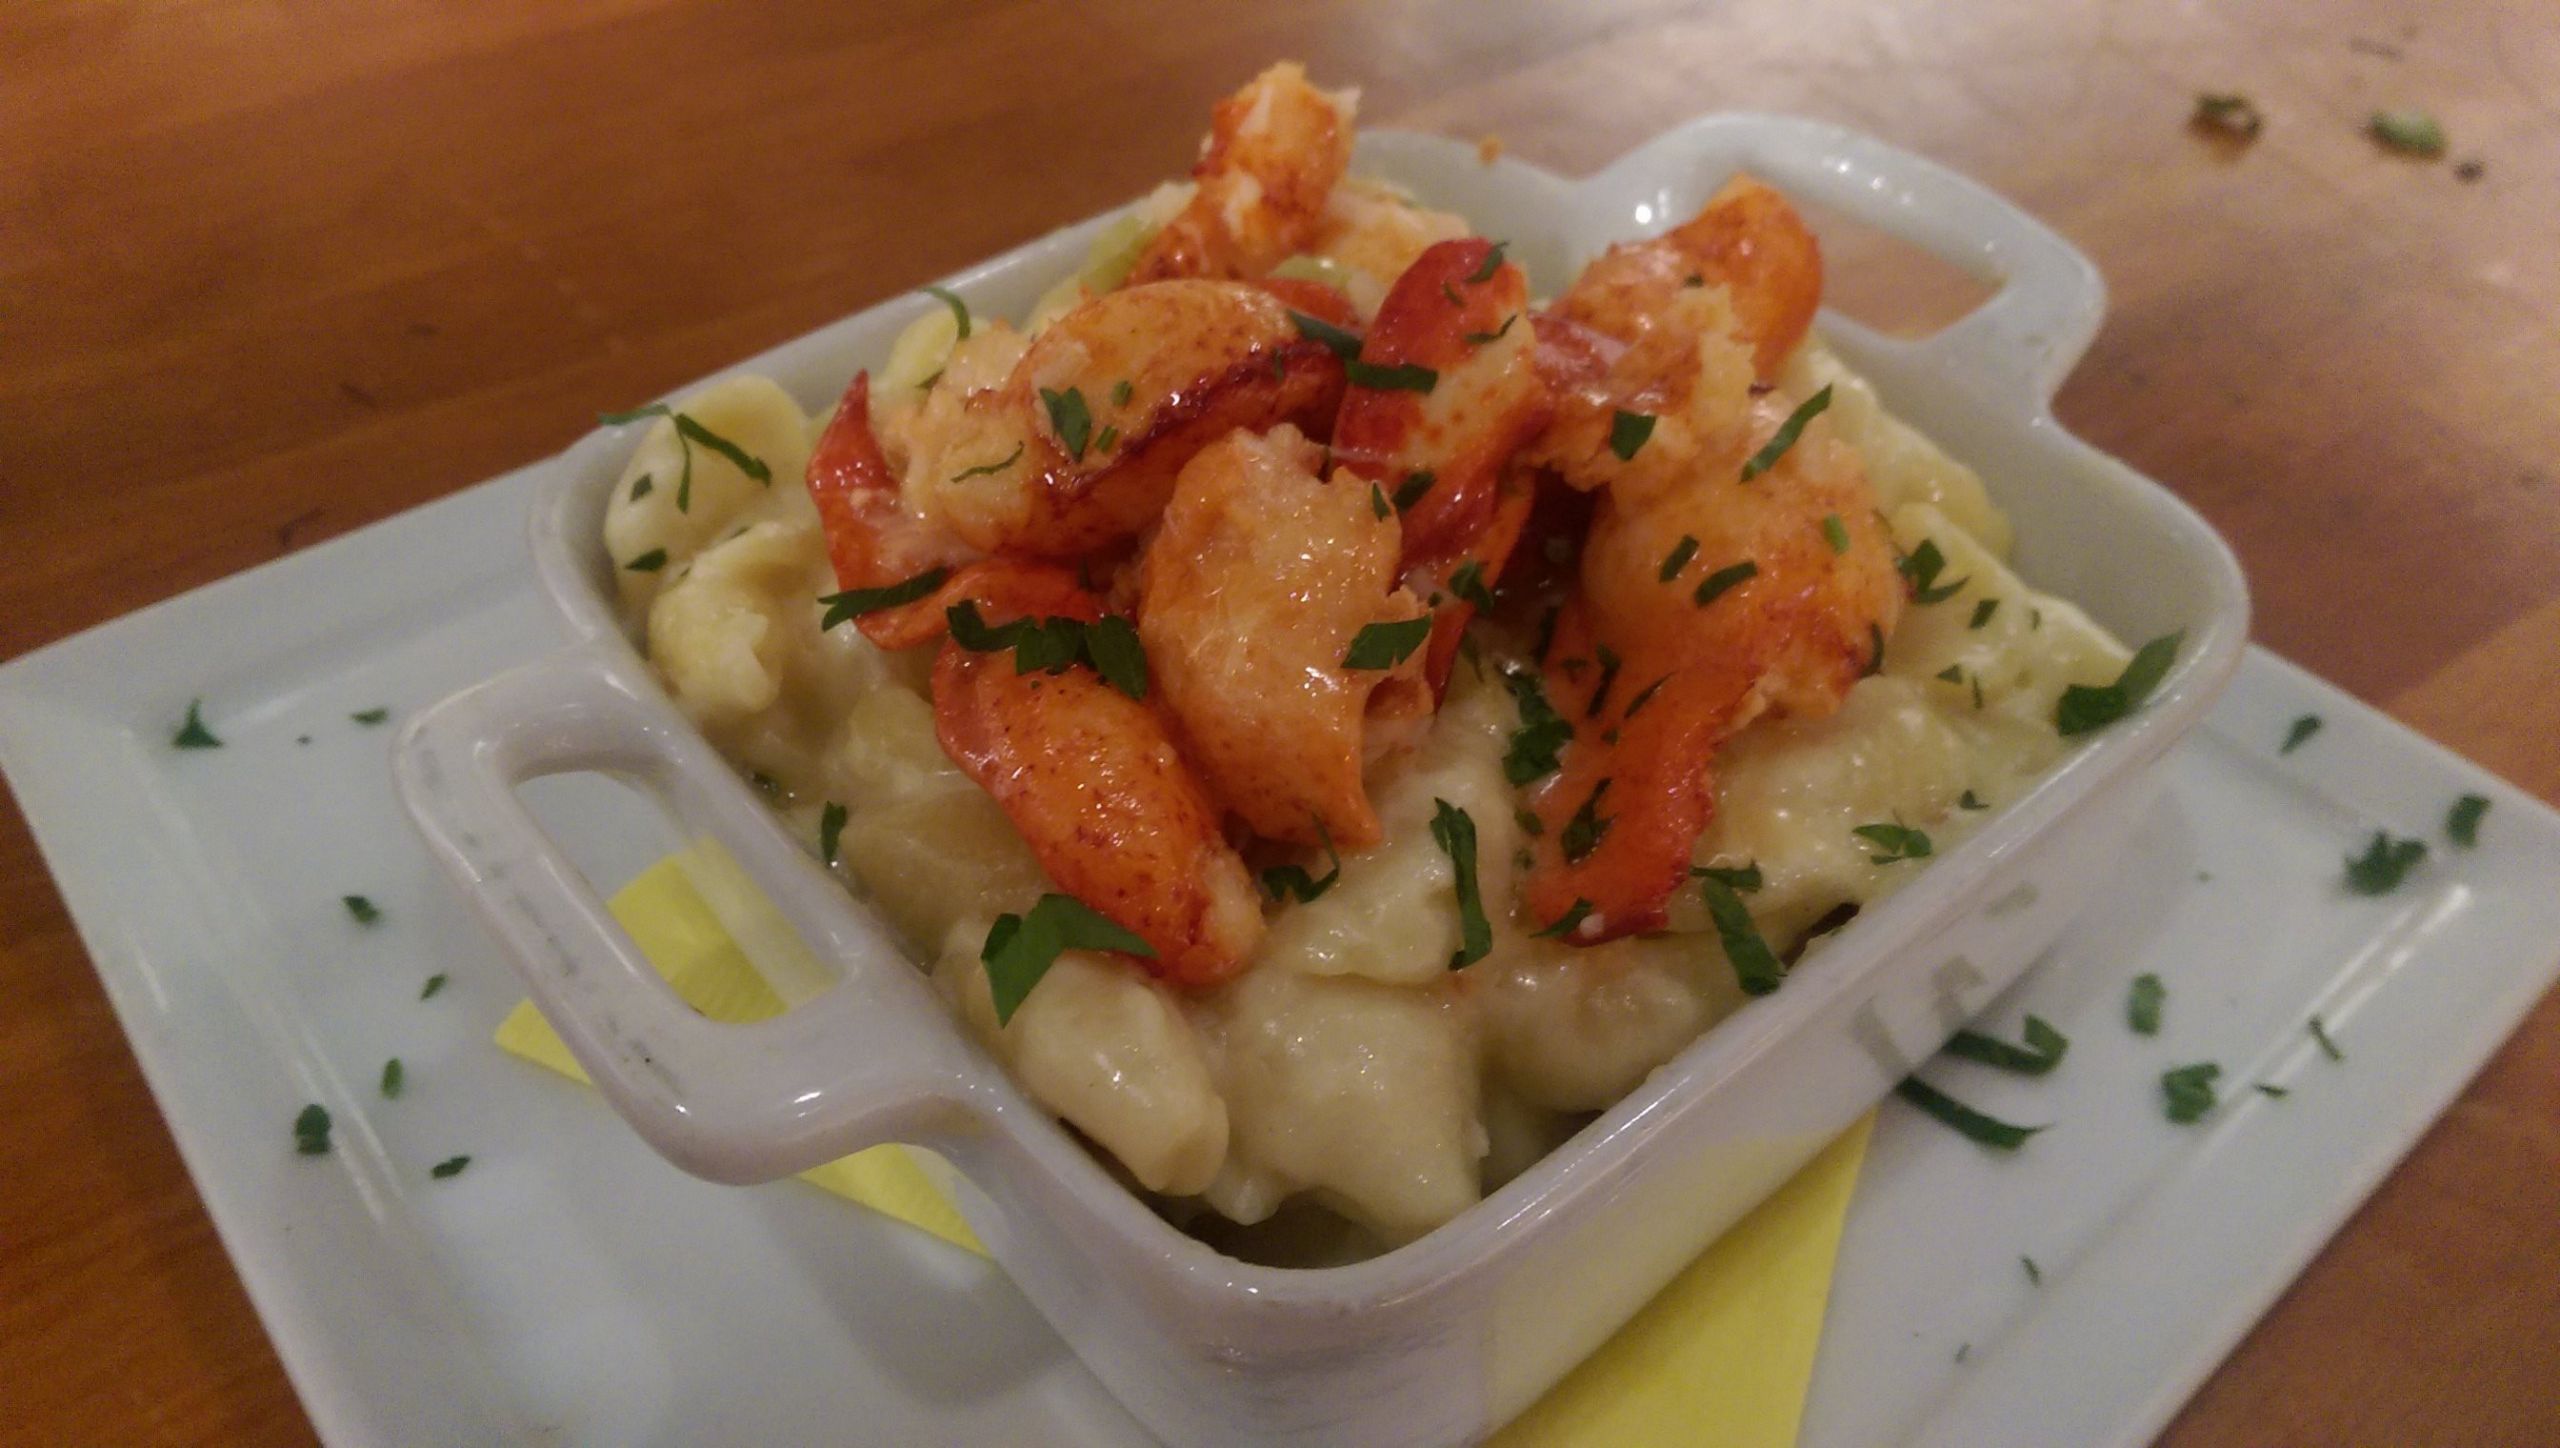 Rustic Kitchen Mar Vista
 The 14 Most Delicious Mac and Cheese Dishes in L A Right